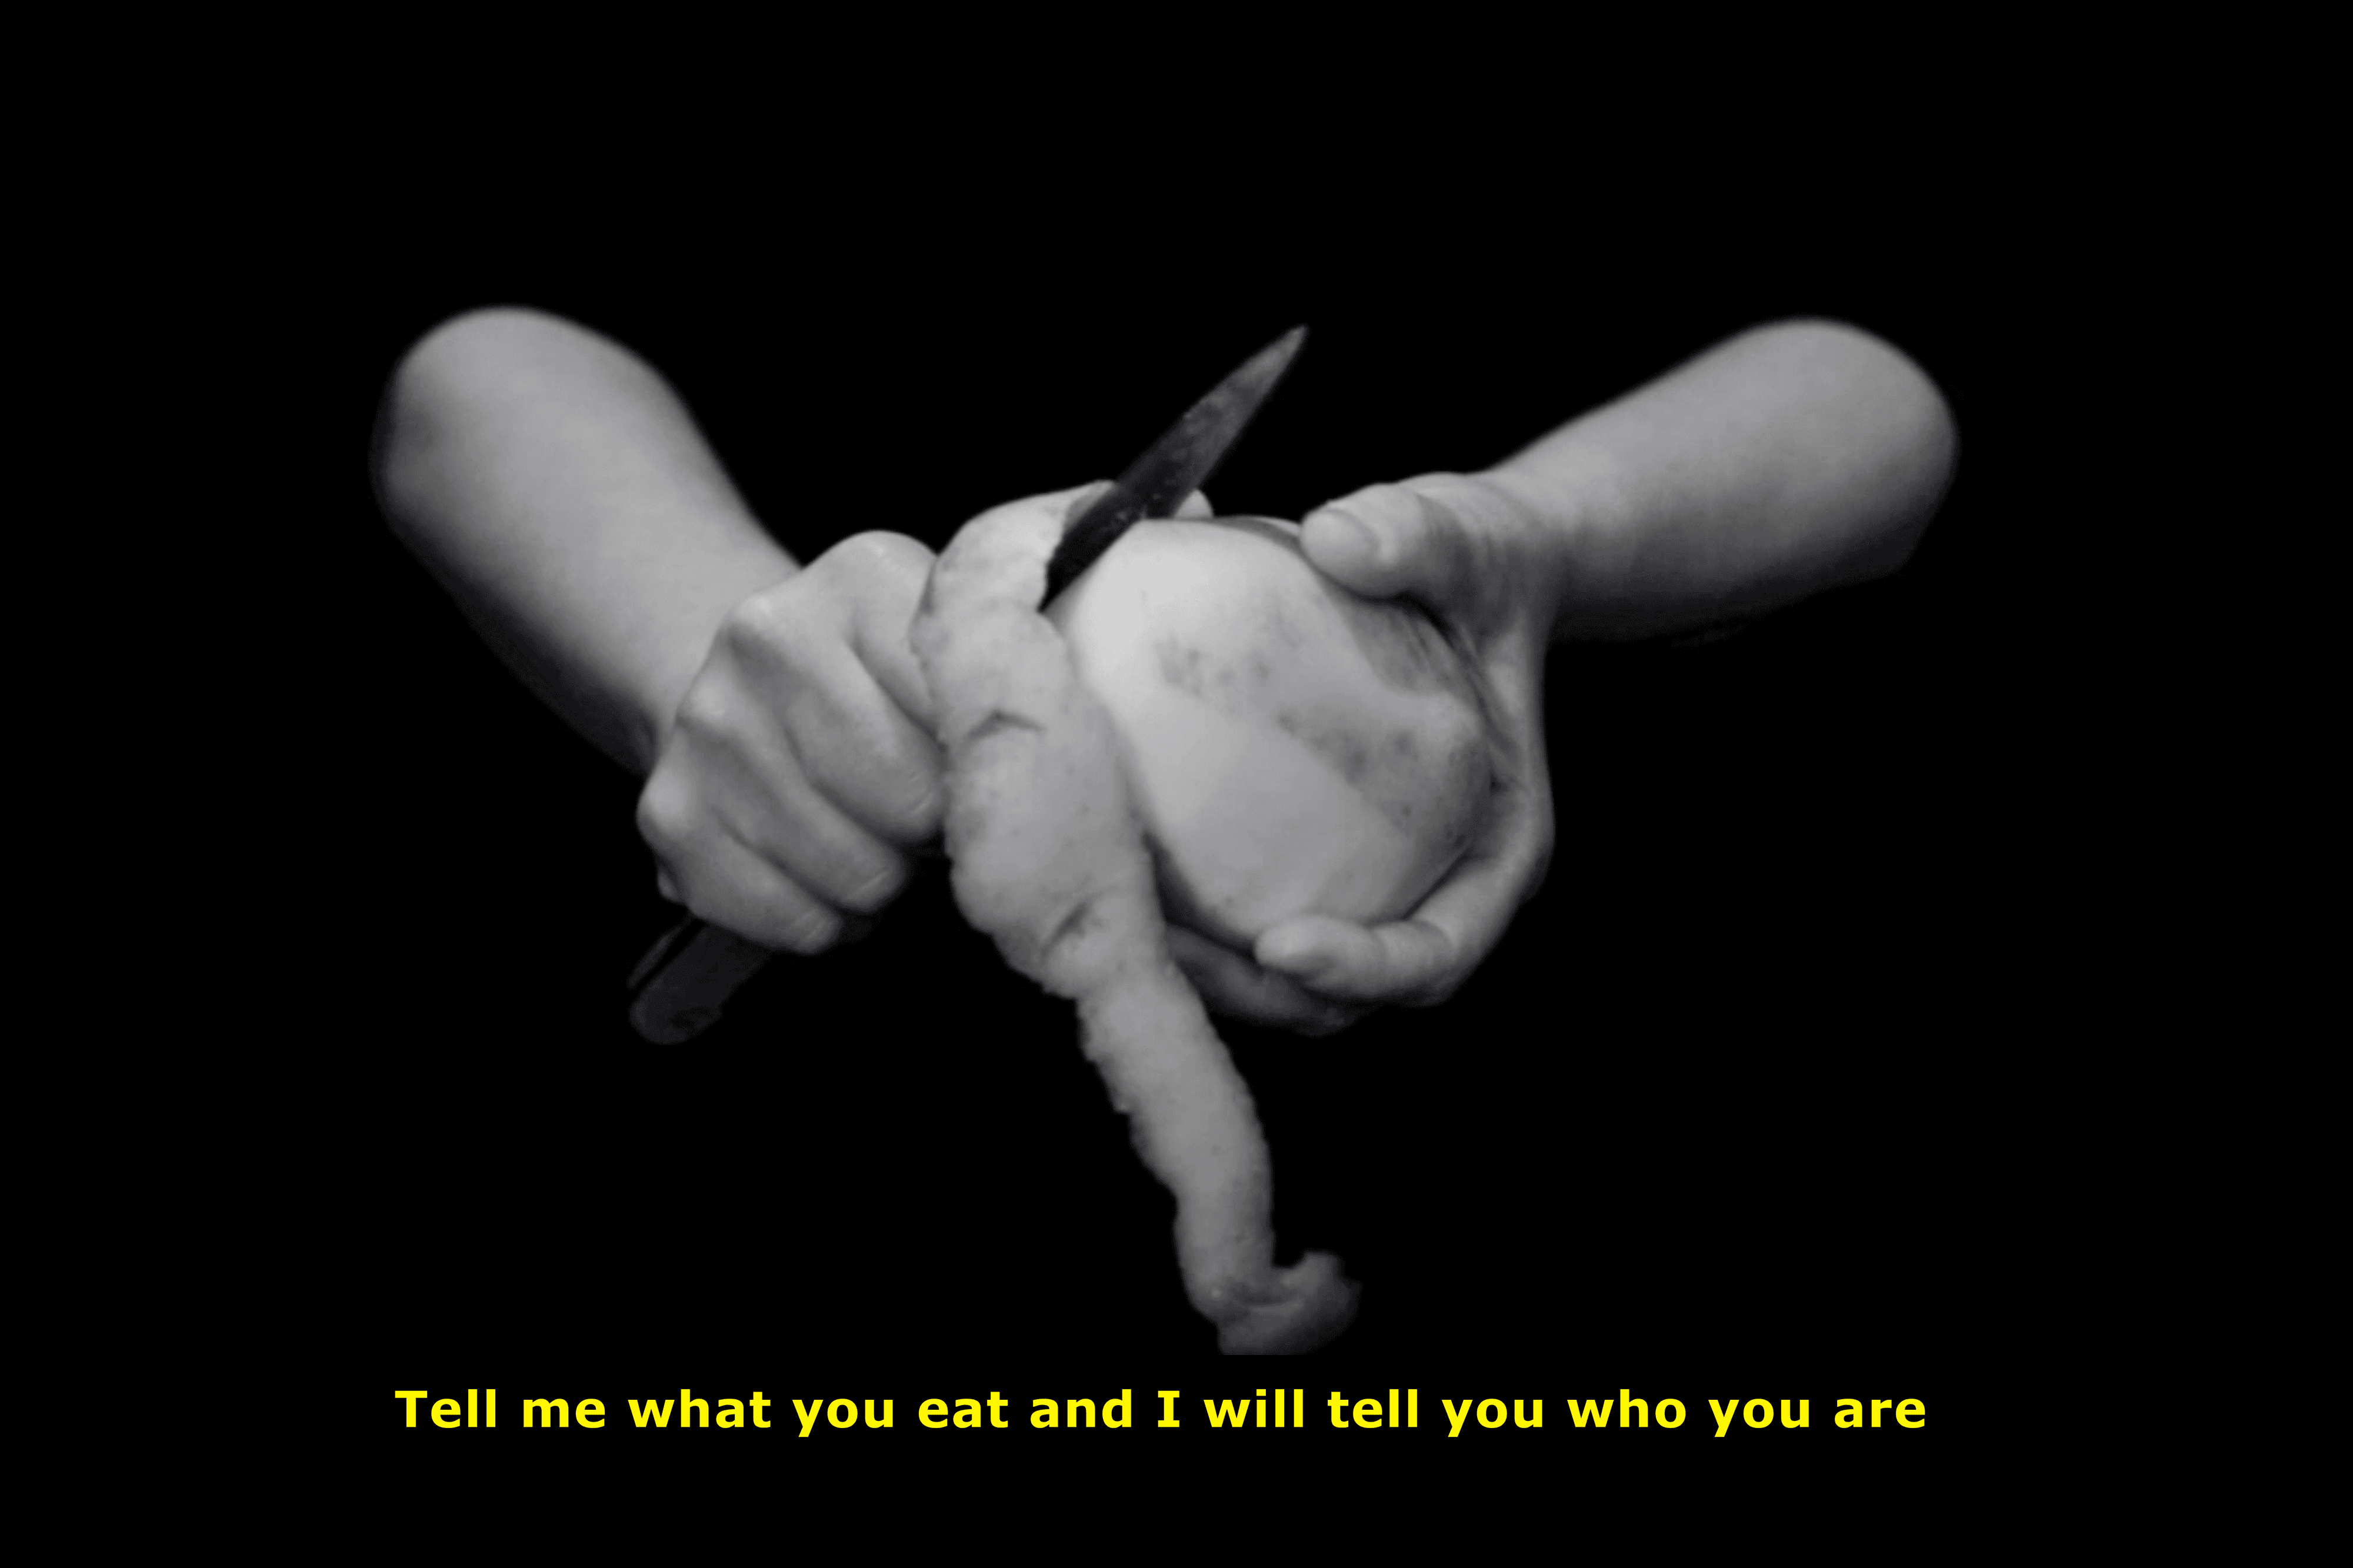 Tell me what you eat and I will tell you who you are